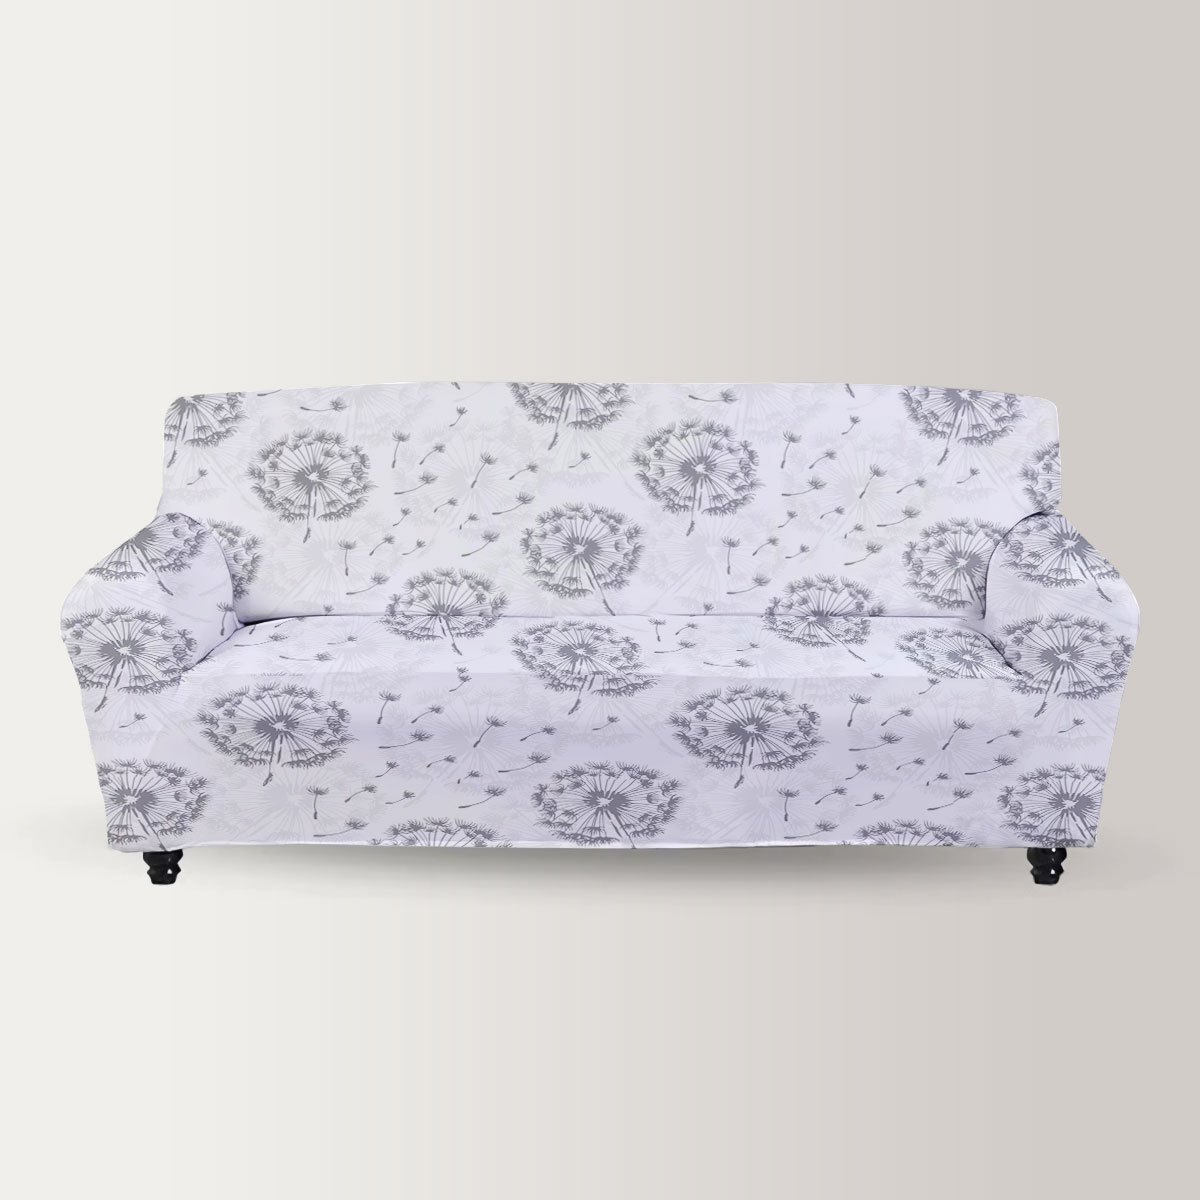 Abstract Dandelion Sofa Cover